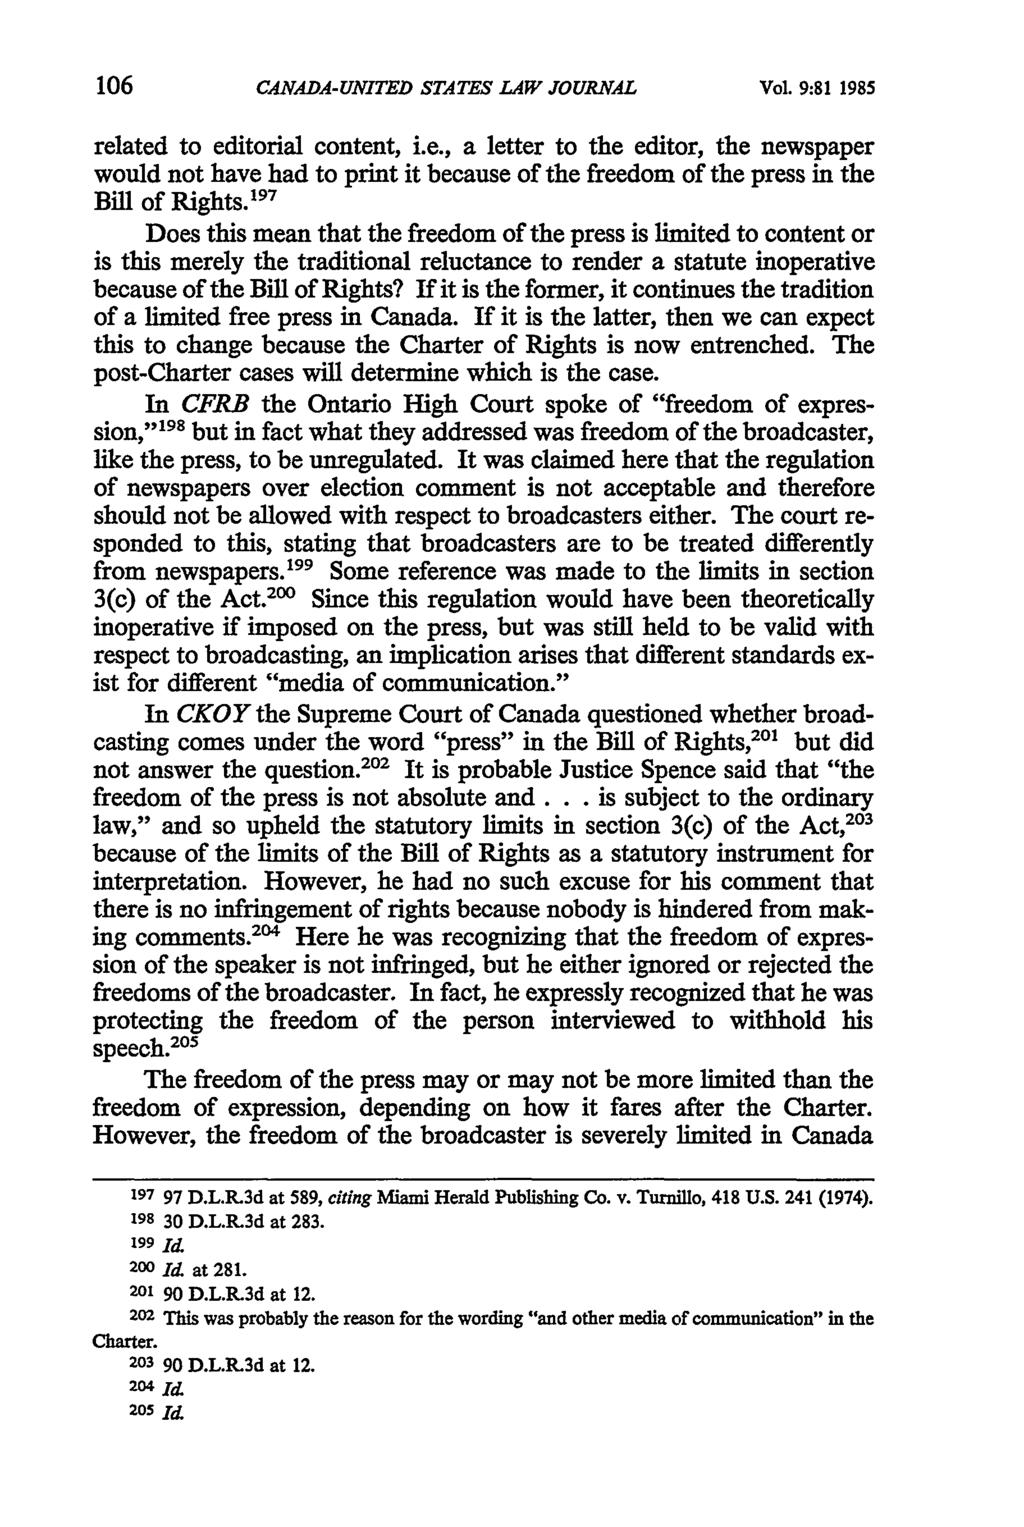 Canada-United States Law Journal, Vol. 9 [1985], Iss., Art. 5 CANADA-UNITED STATES LAW JOURNAL Vol. 9:81 1985 related to editorial content, i.e., a letter to the editor, the newspaper would not have had to print it because of the freedom of the press in the Bill of Rights.